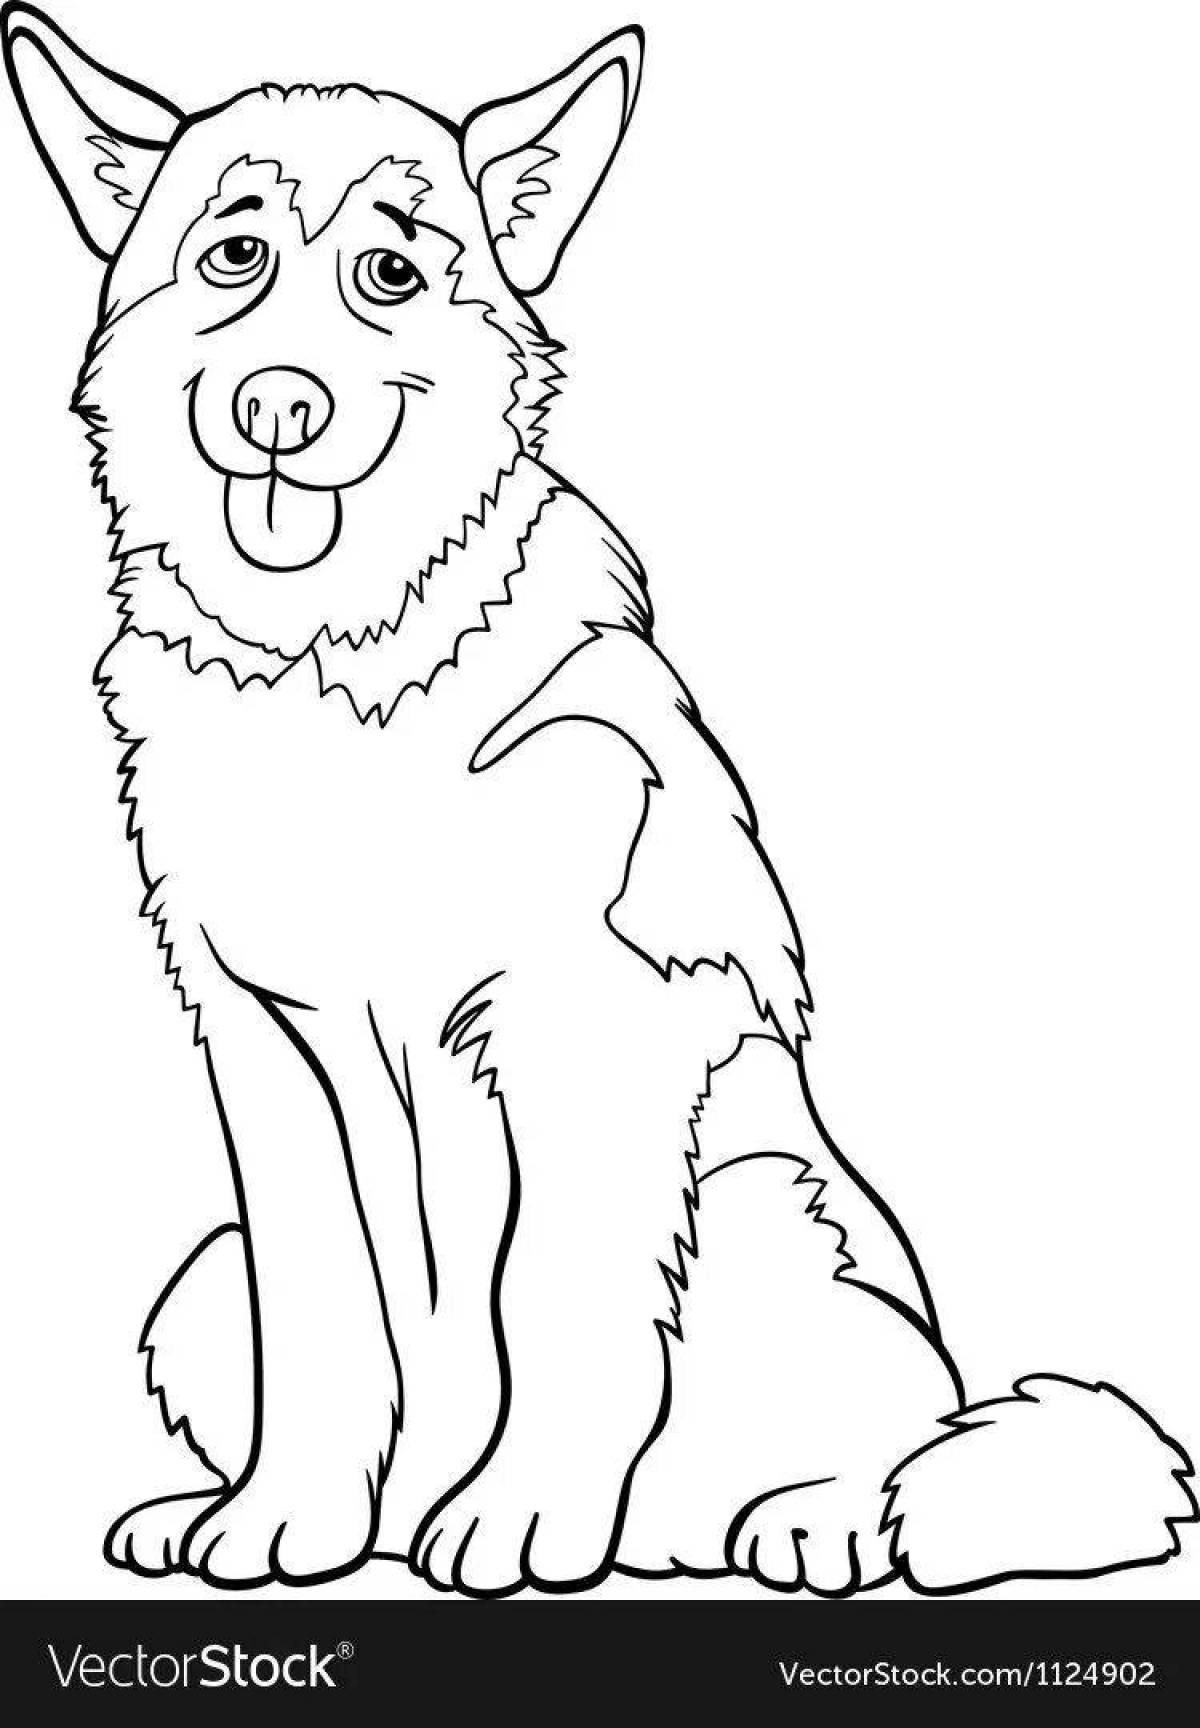 Fancy husky coloring book for kids